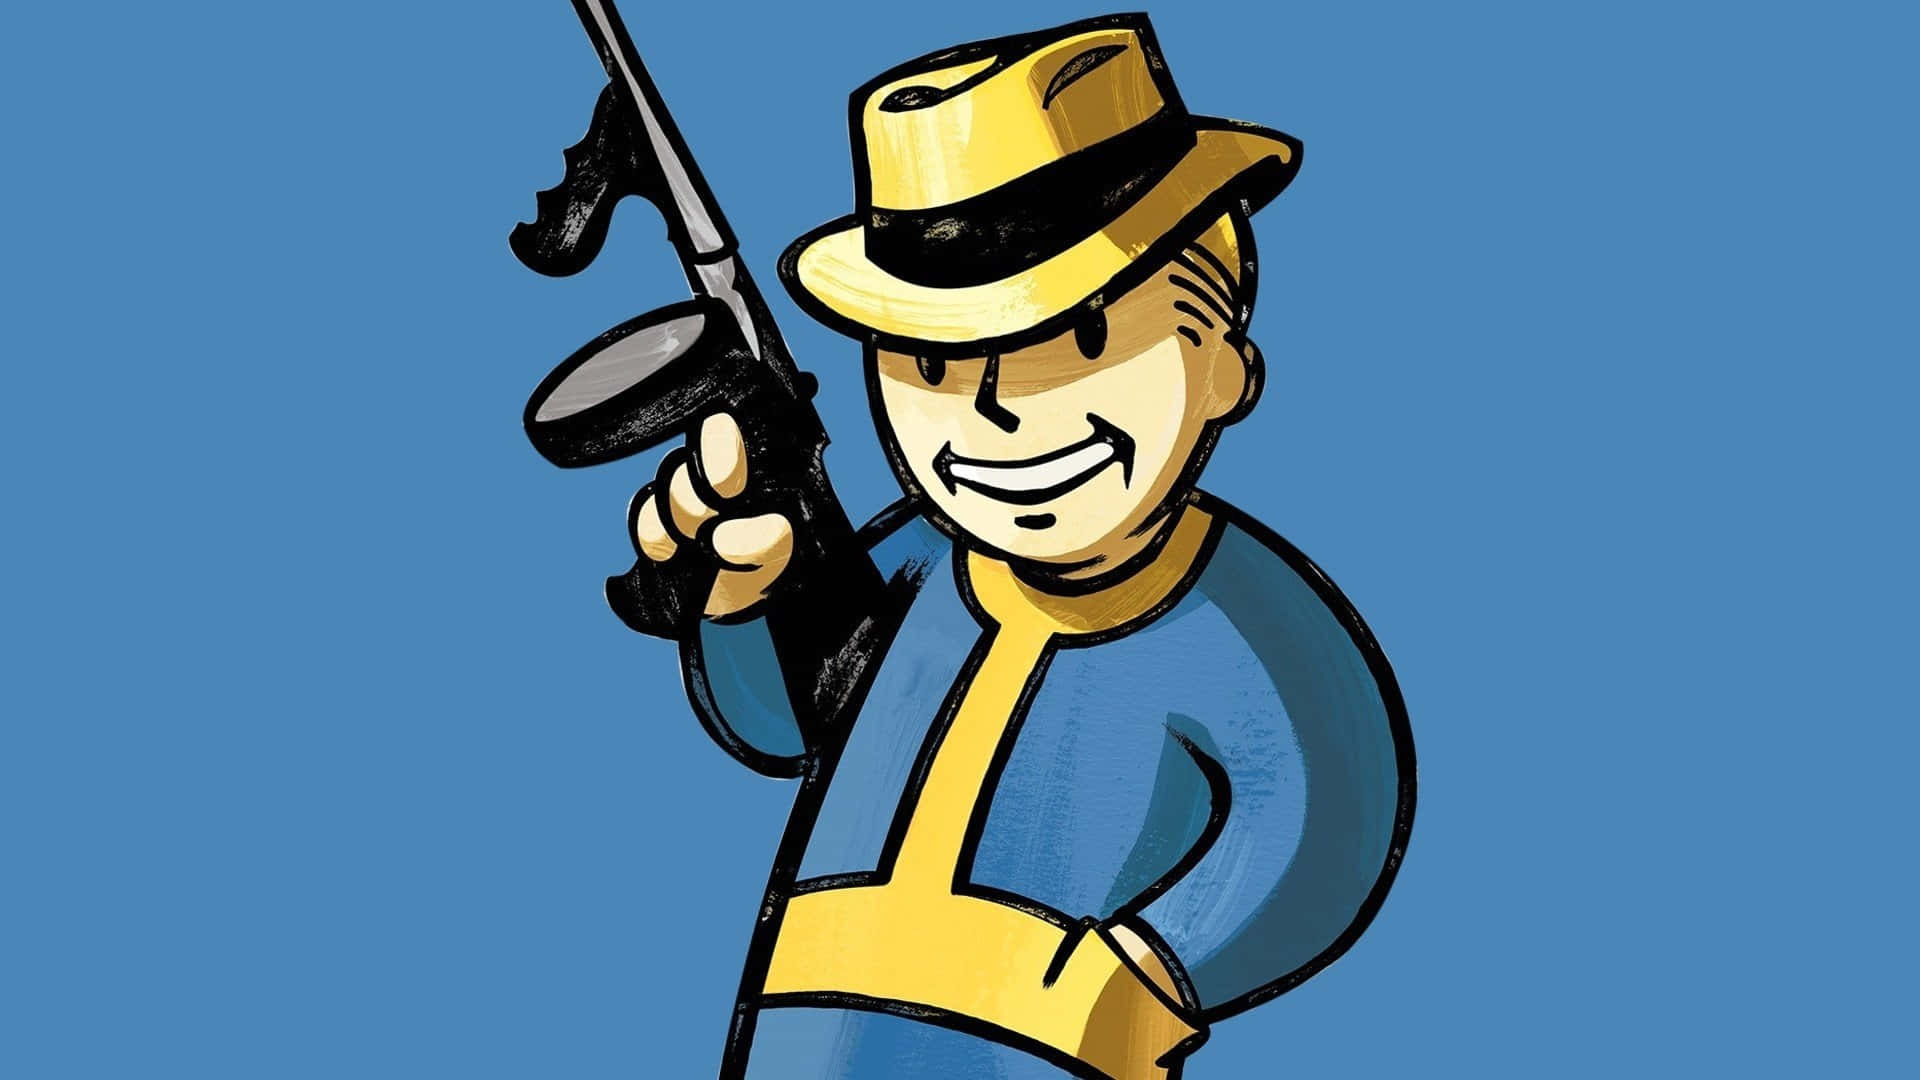 Live life to the fullest, Vault Boy-style! Wallpaper